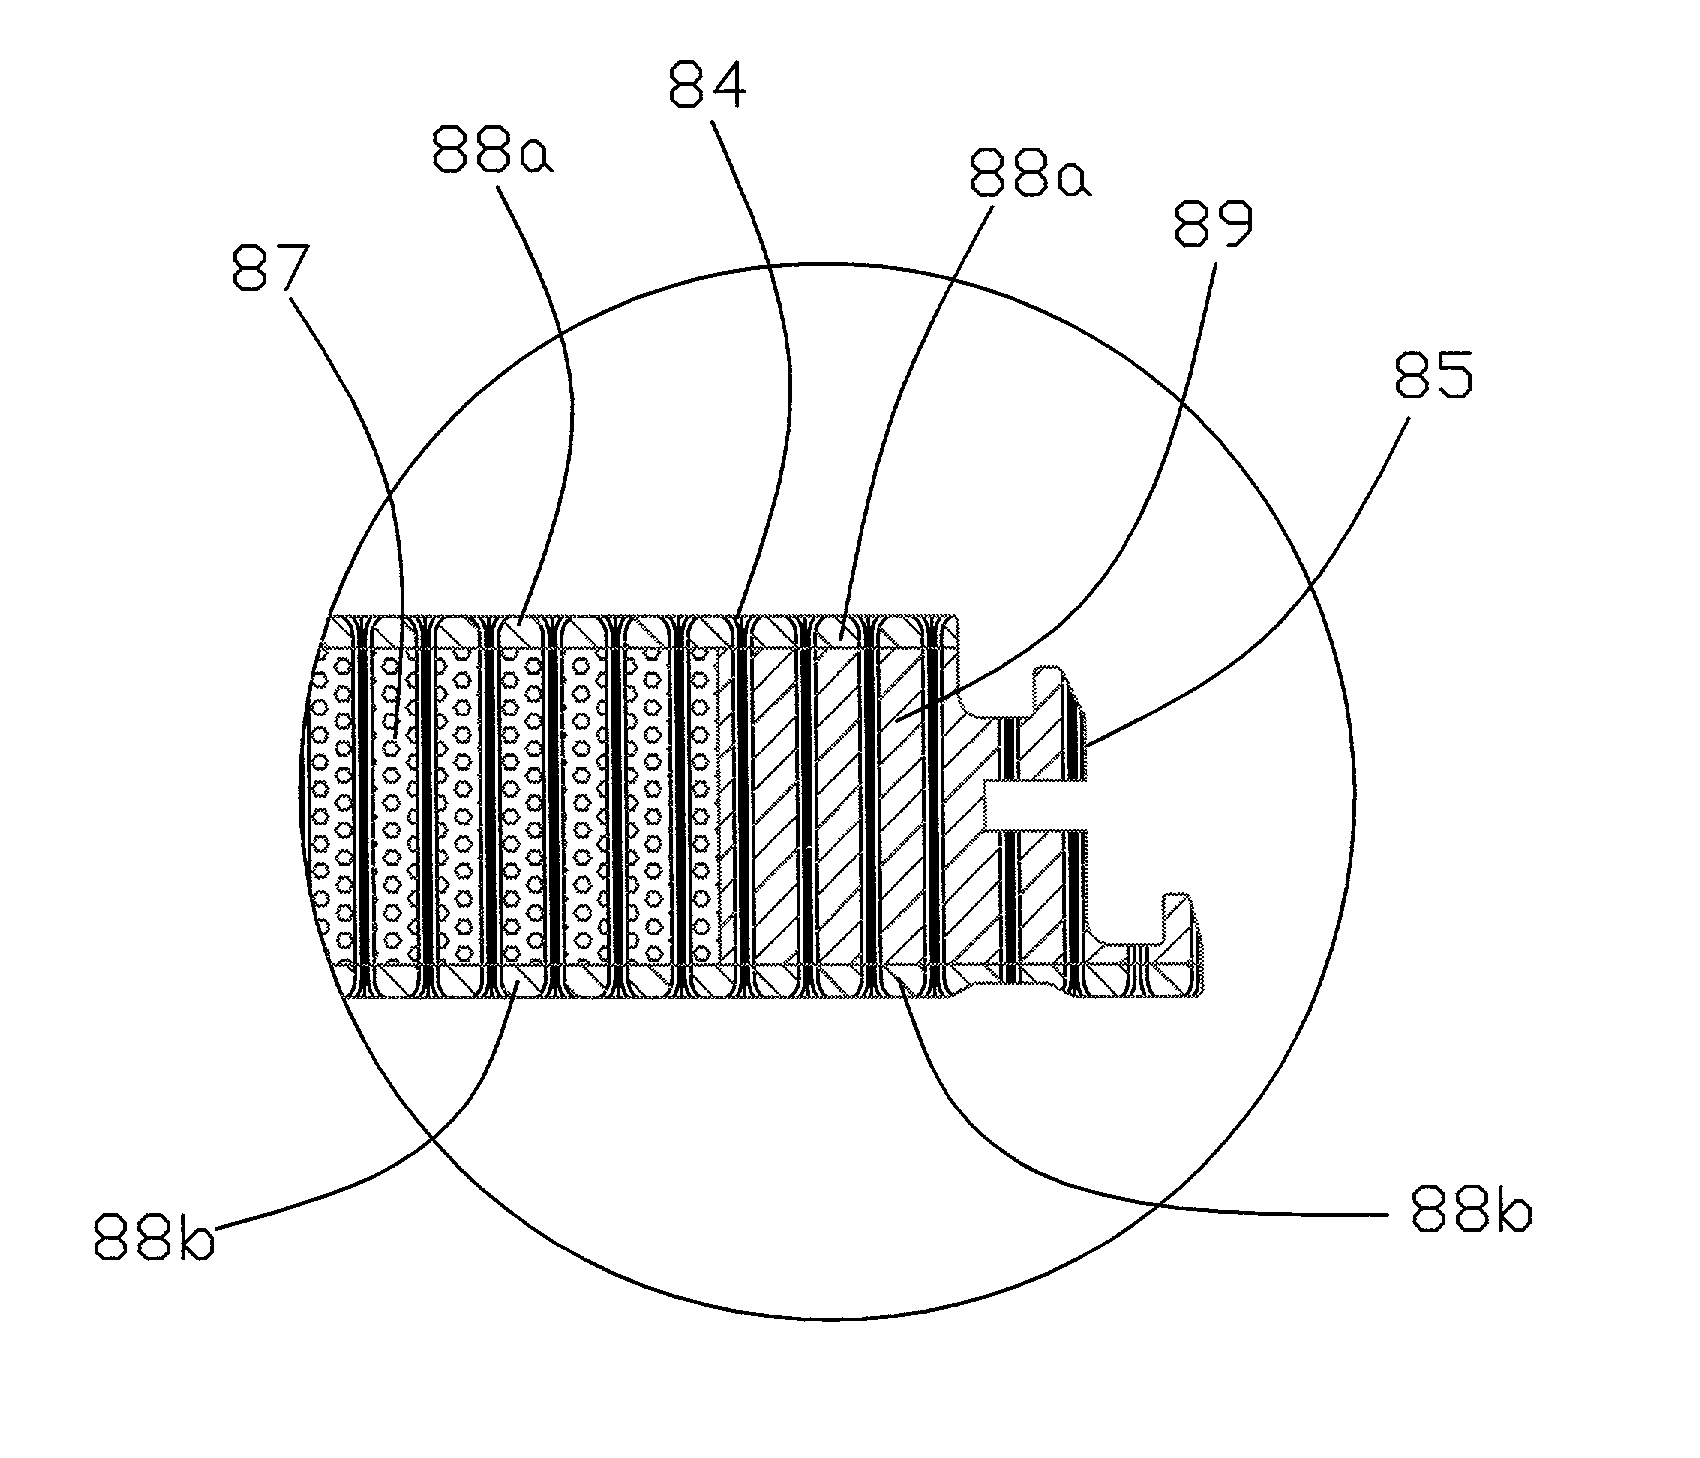 Method of clinching the top and bottom ends of Z-axis fibers into the respective top and bottom surfaces of a composite laminate